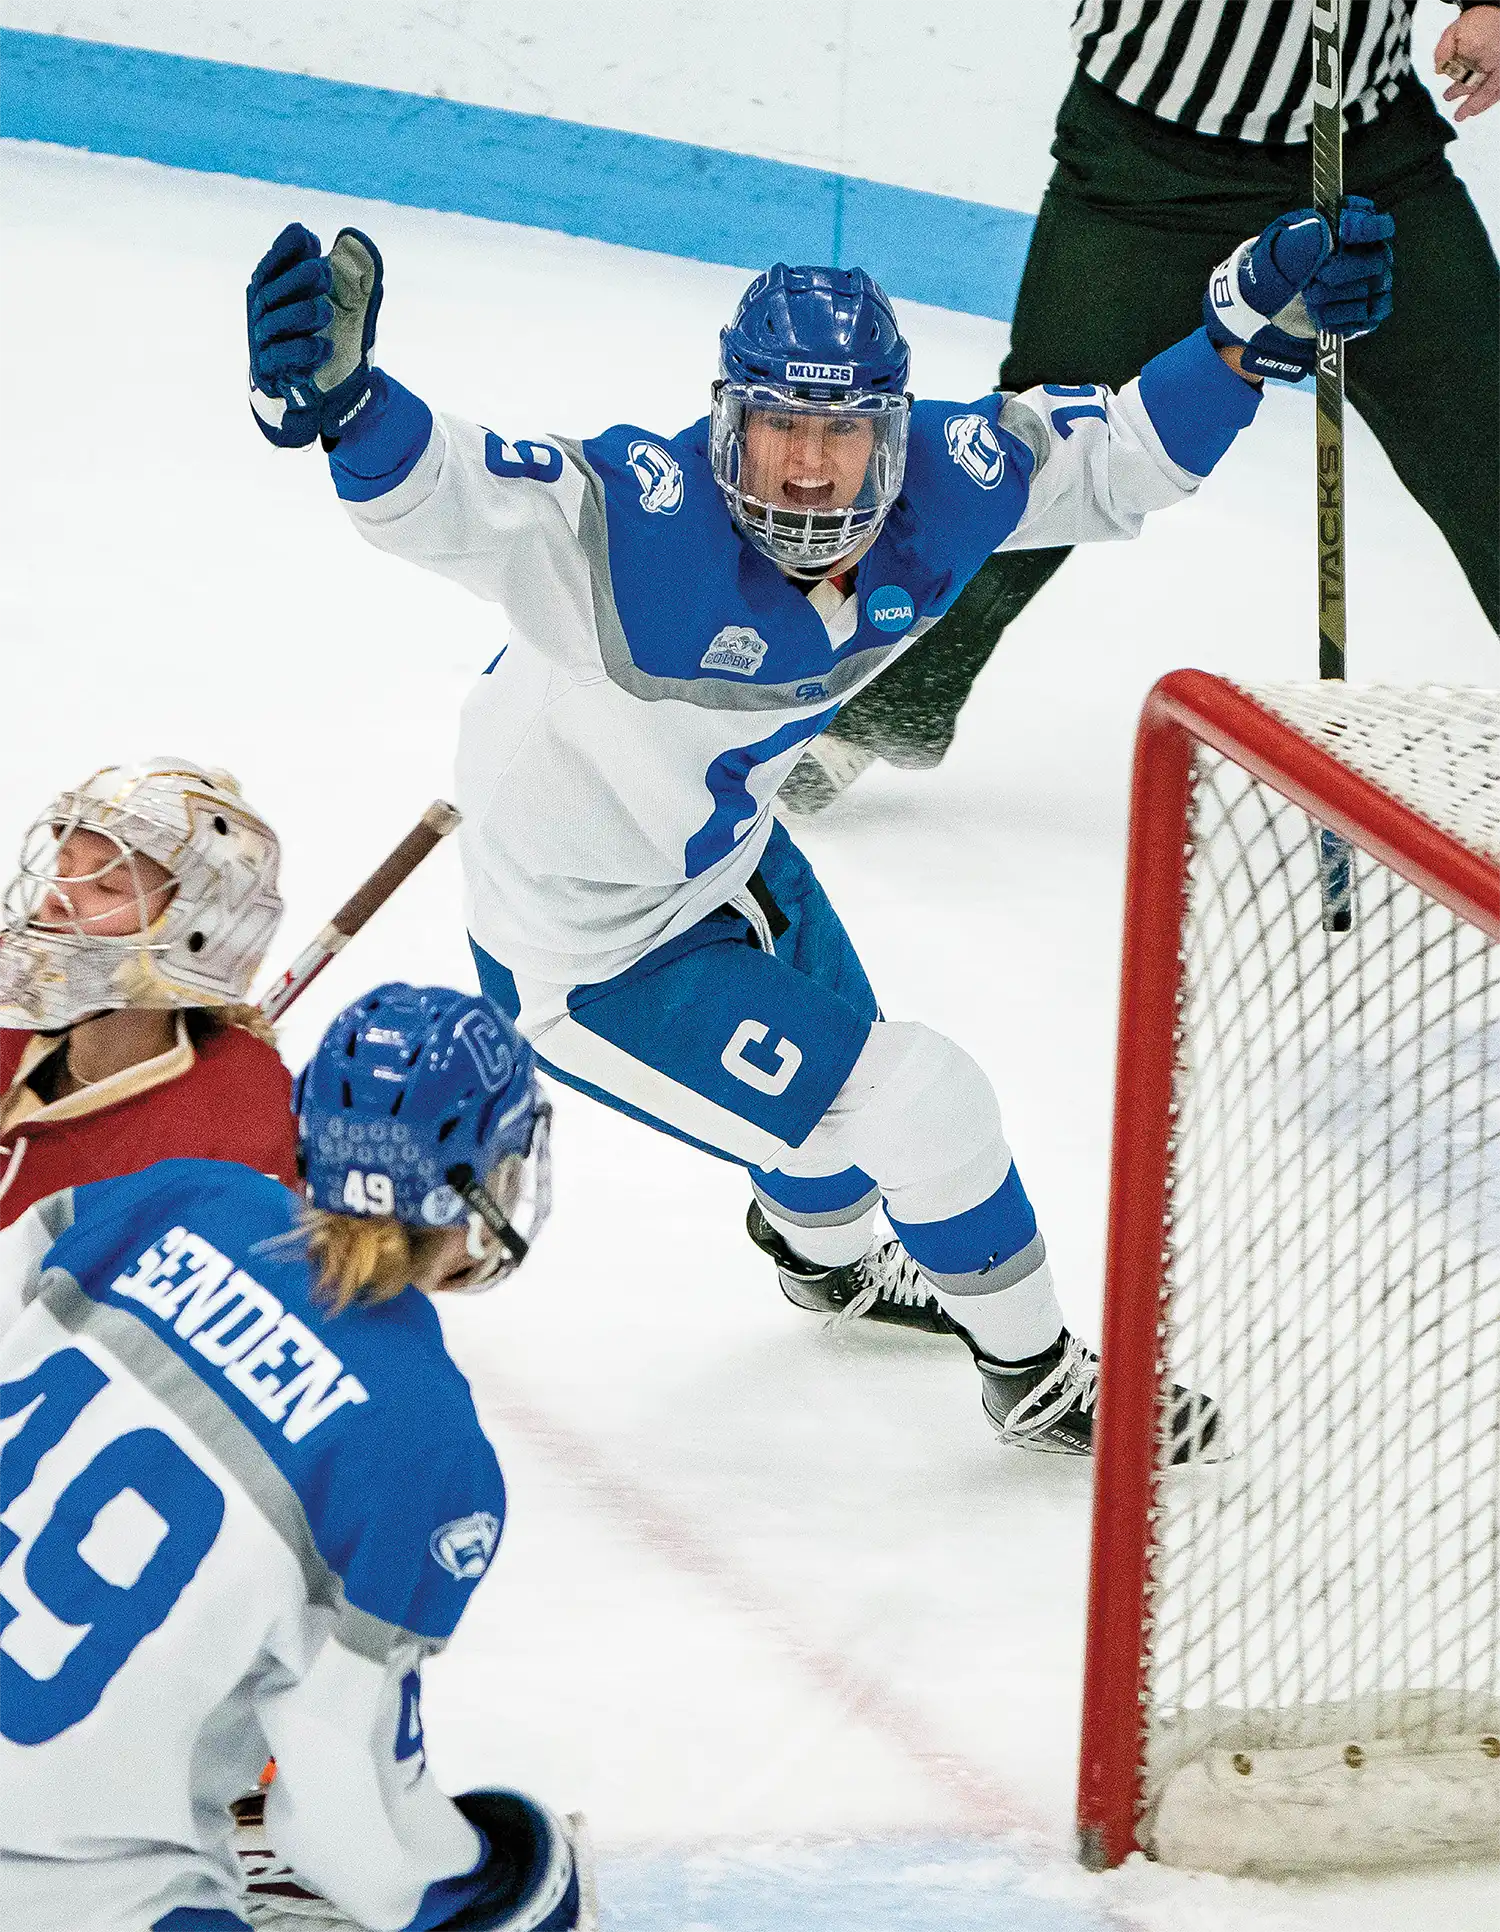 Colby College hockey player celebrating a goal